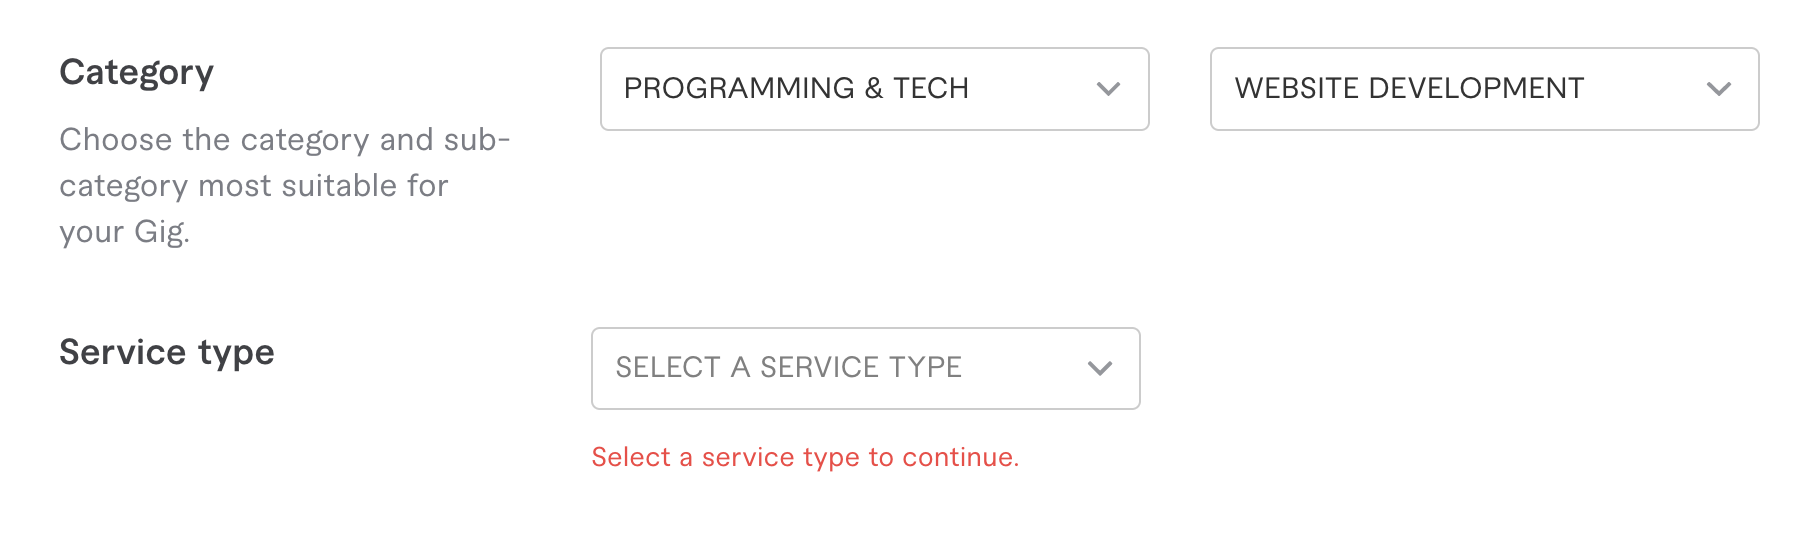 Service type.png